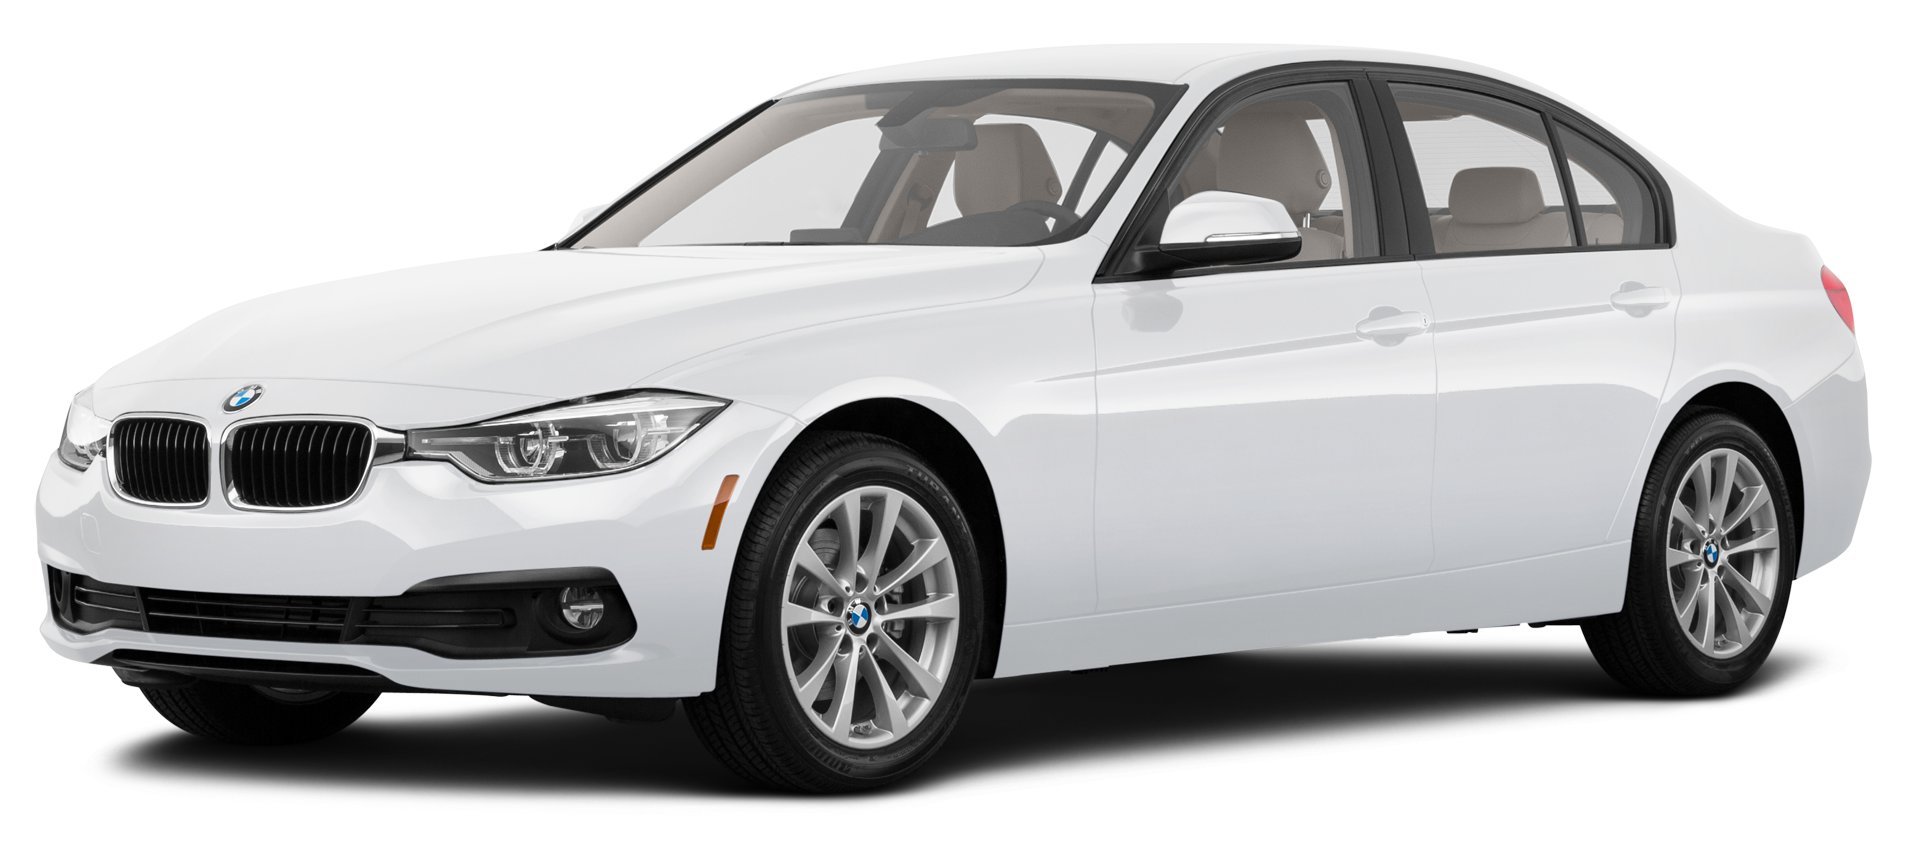  BMW 320I oem parts and accessories on sale